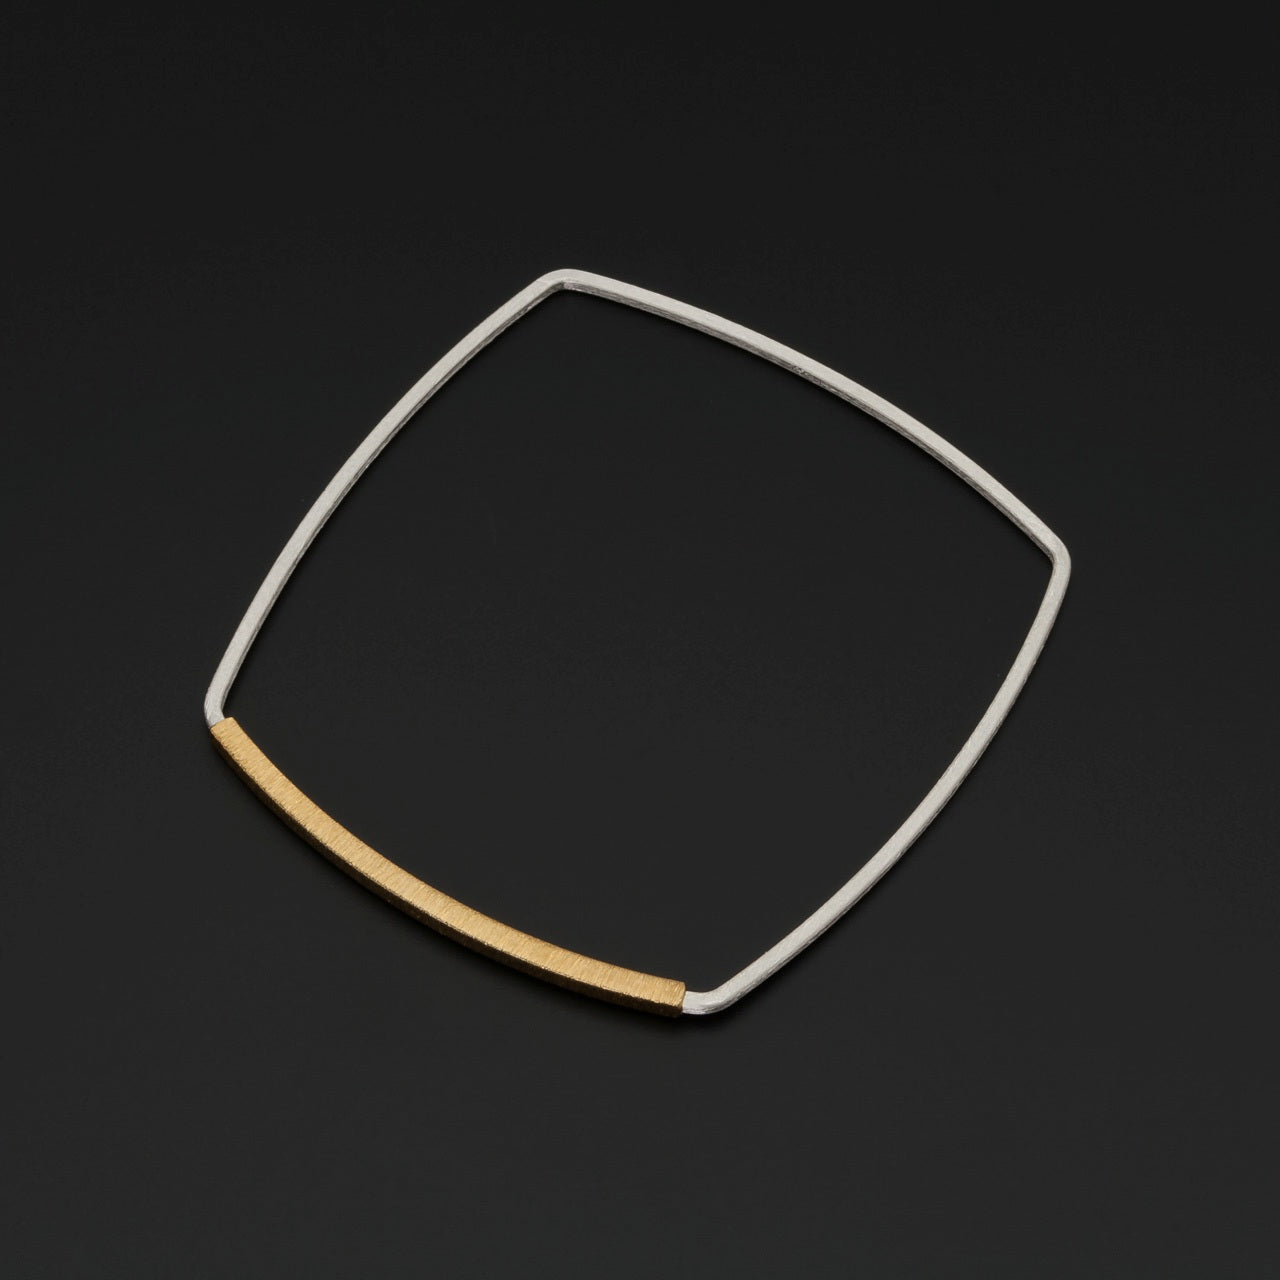 Square Silver & Gold Accent Bangle - The Nancy Smillie Shop - Art, Jewellery & Designer Gifts Glasgow